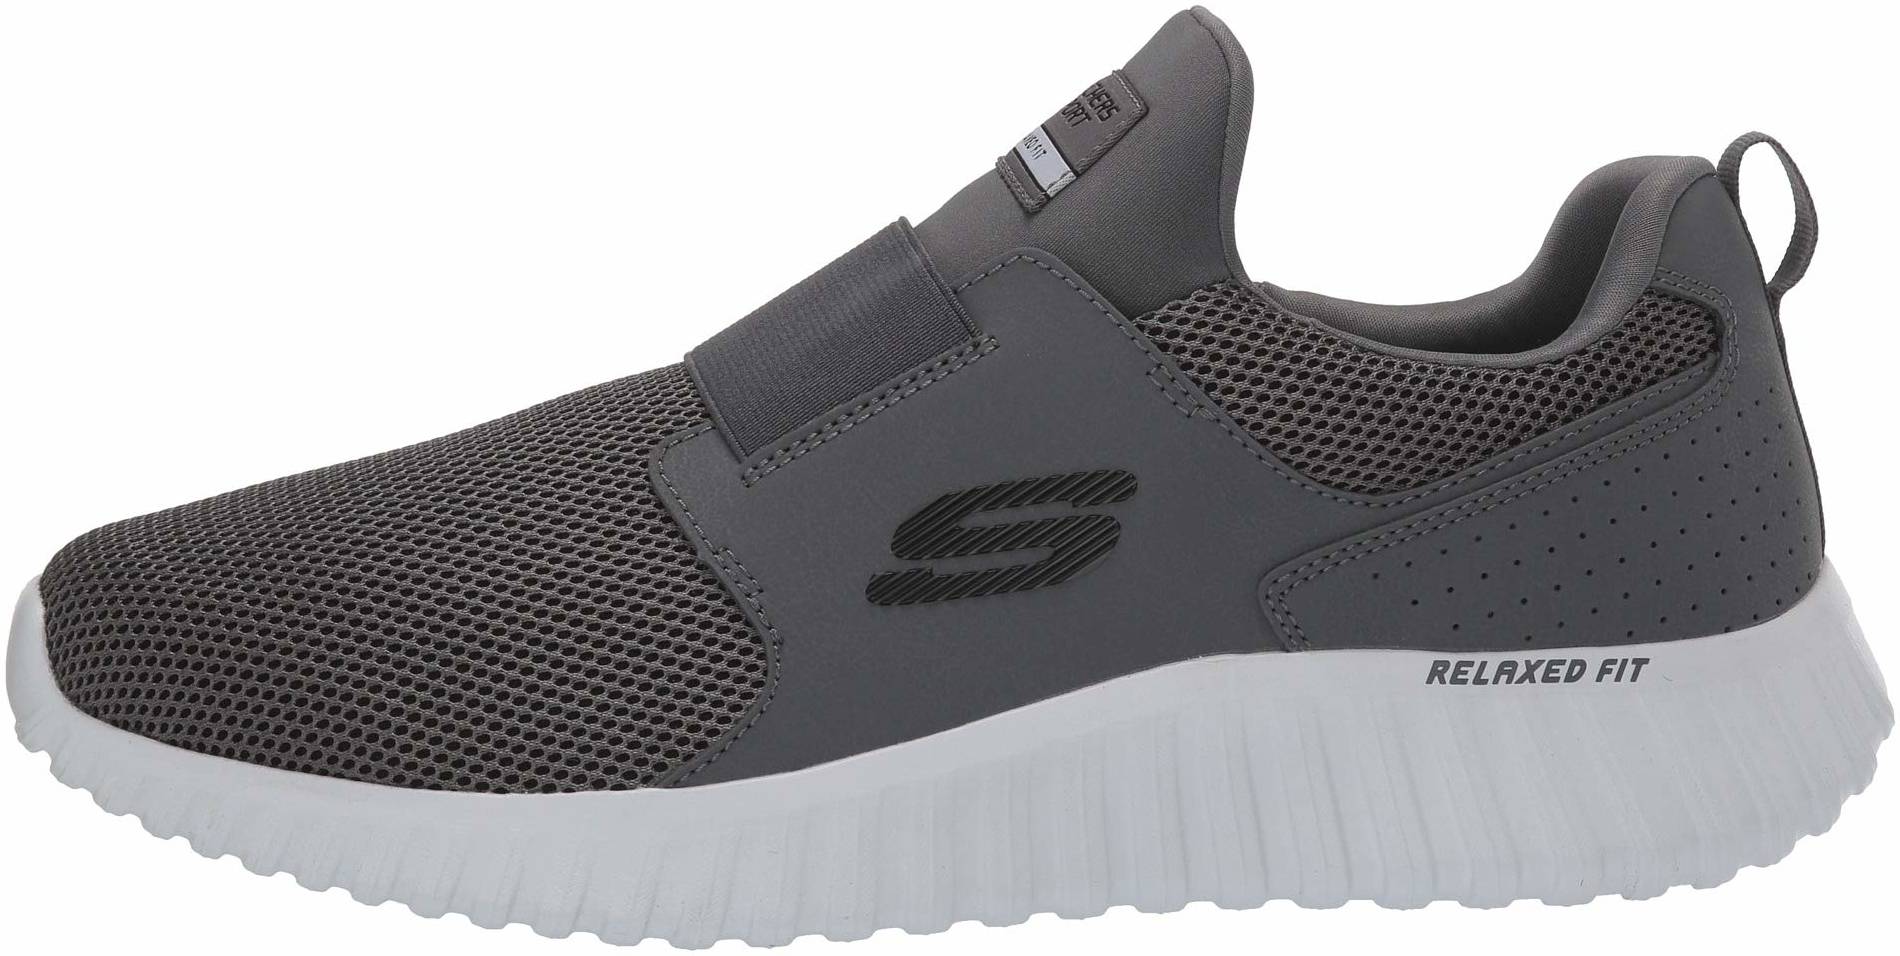 skechers depth charge review